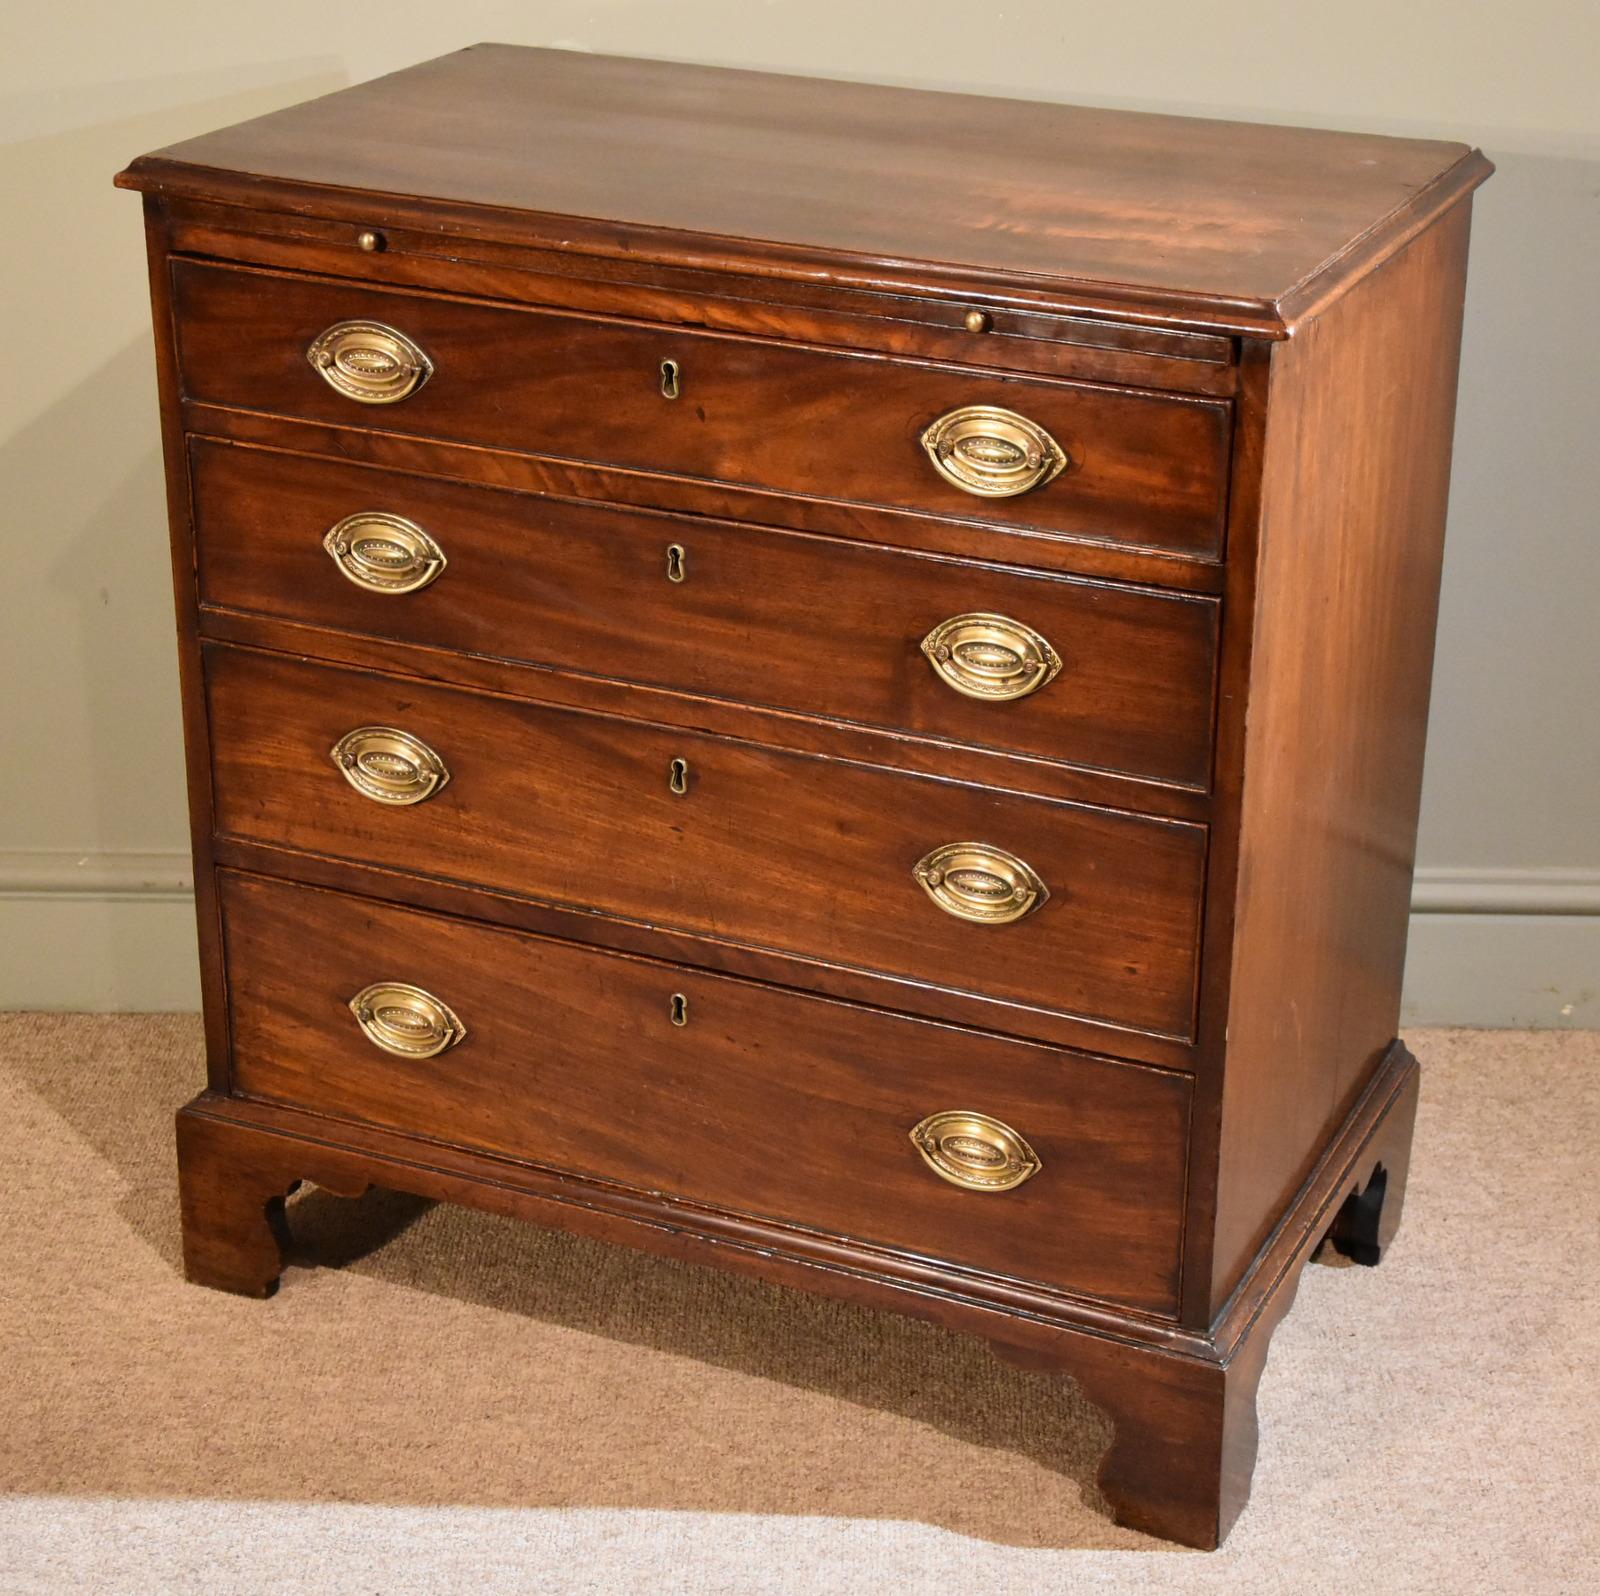 A matching pair of George III mahogany chest of drawers. Pair of matching chests one with brushing slide. These would look fantastic either side of a bed or fireplace.
 
Dimensions:
Height 33